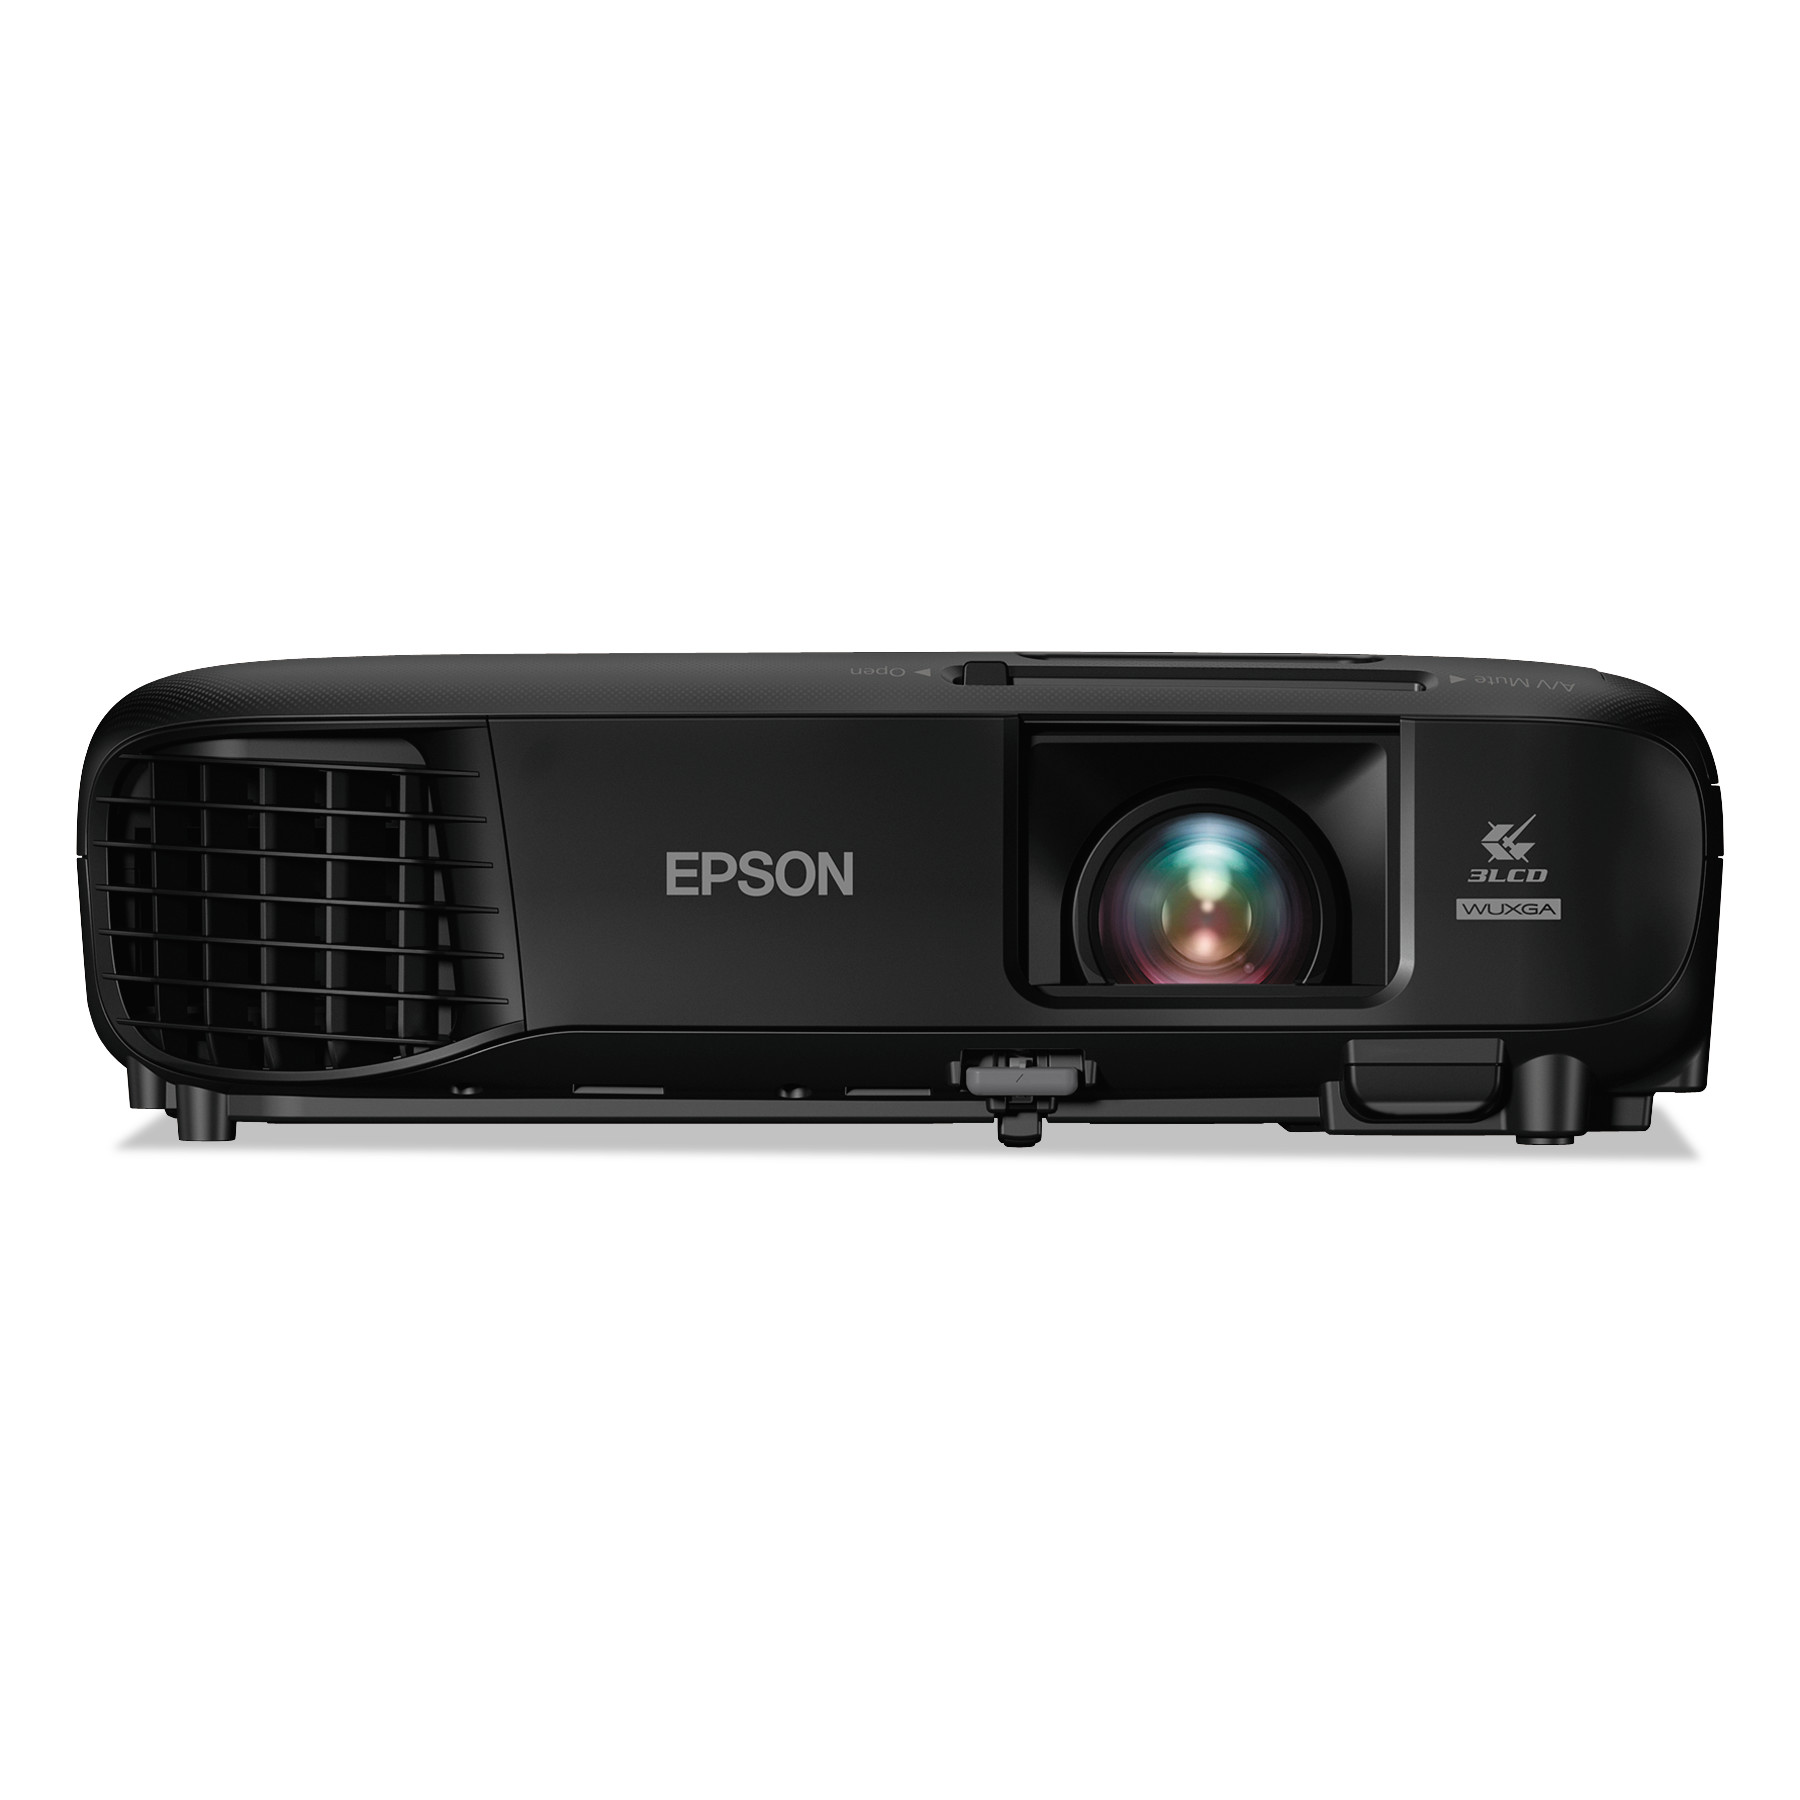  Epson V11H846120 PowerLite 1286 Wireless 3LCD Projector, 3600 lm, 1920x1200 Pixels, Optical Zoom (EPSV11H846120) 